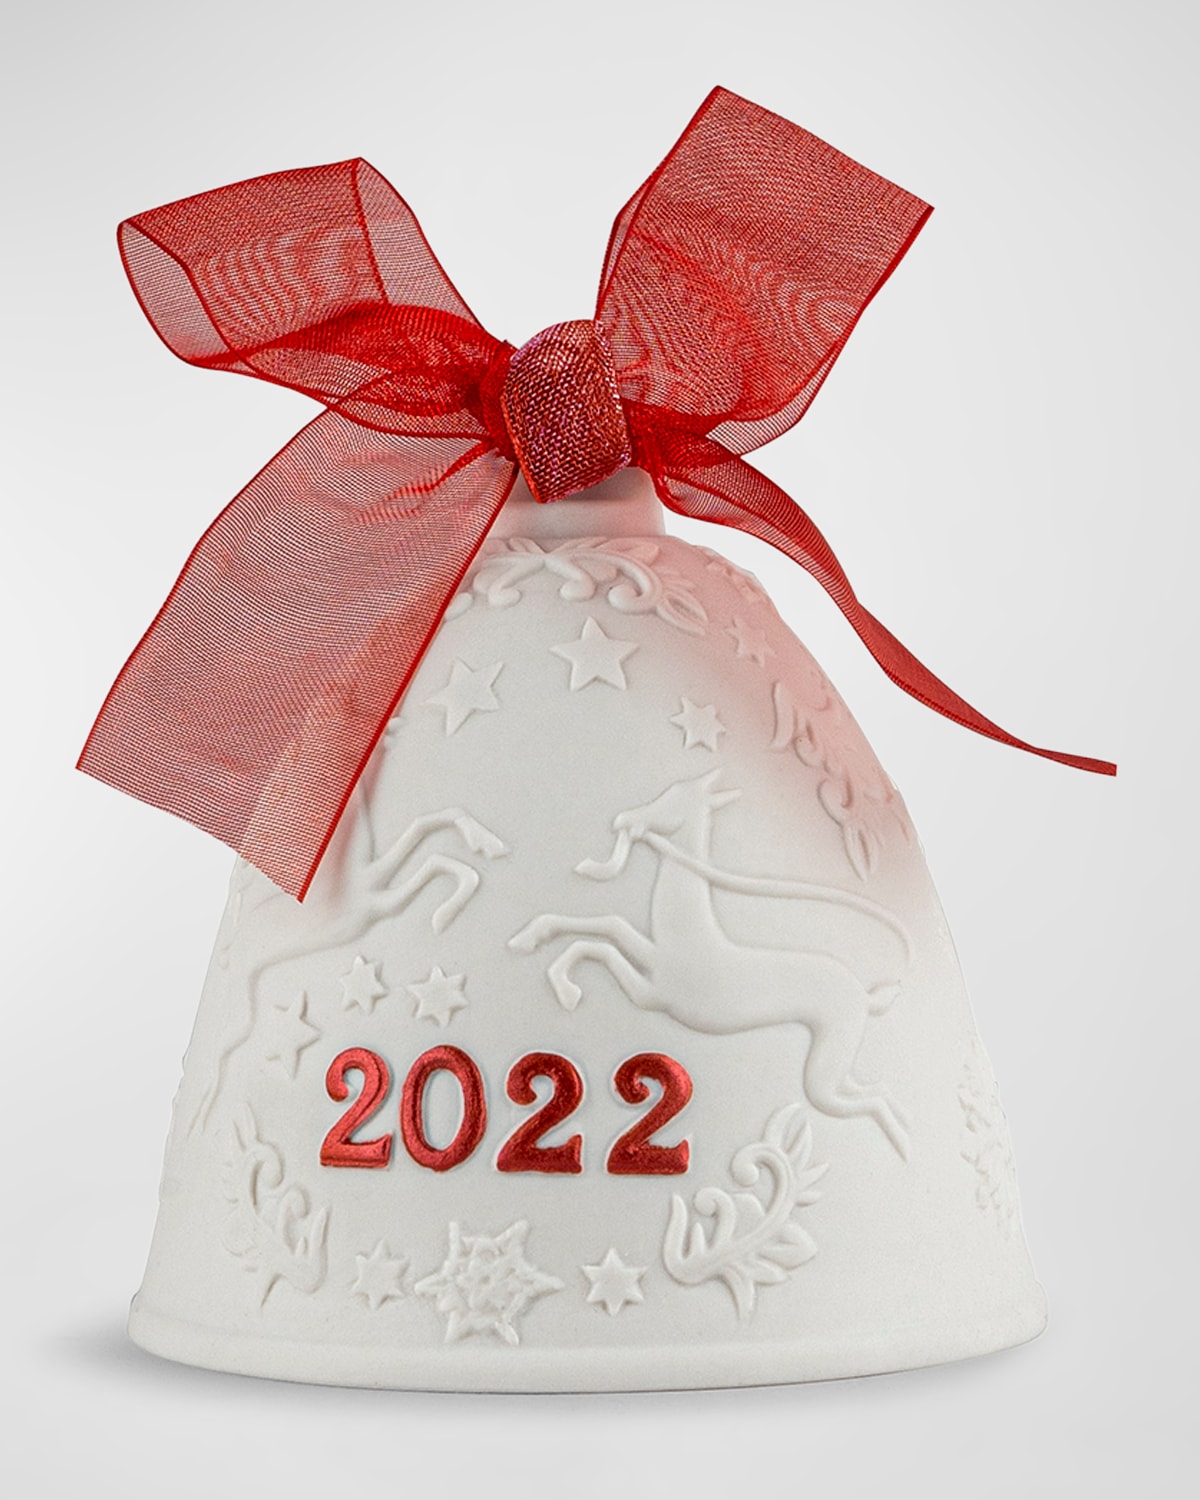 2022 Christmas Bell Ornament (Re-Deco Red)